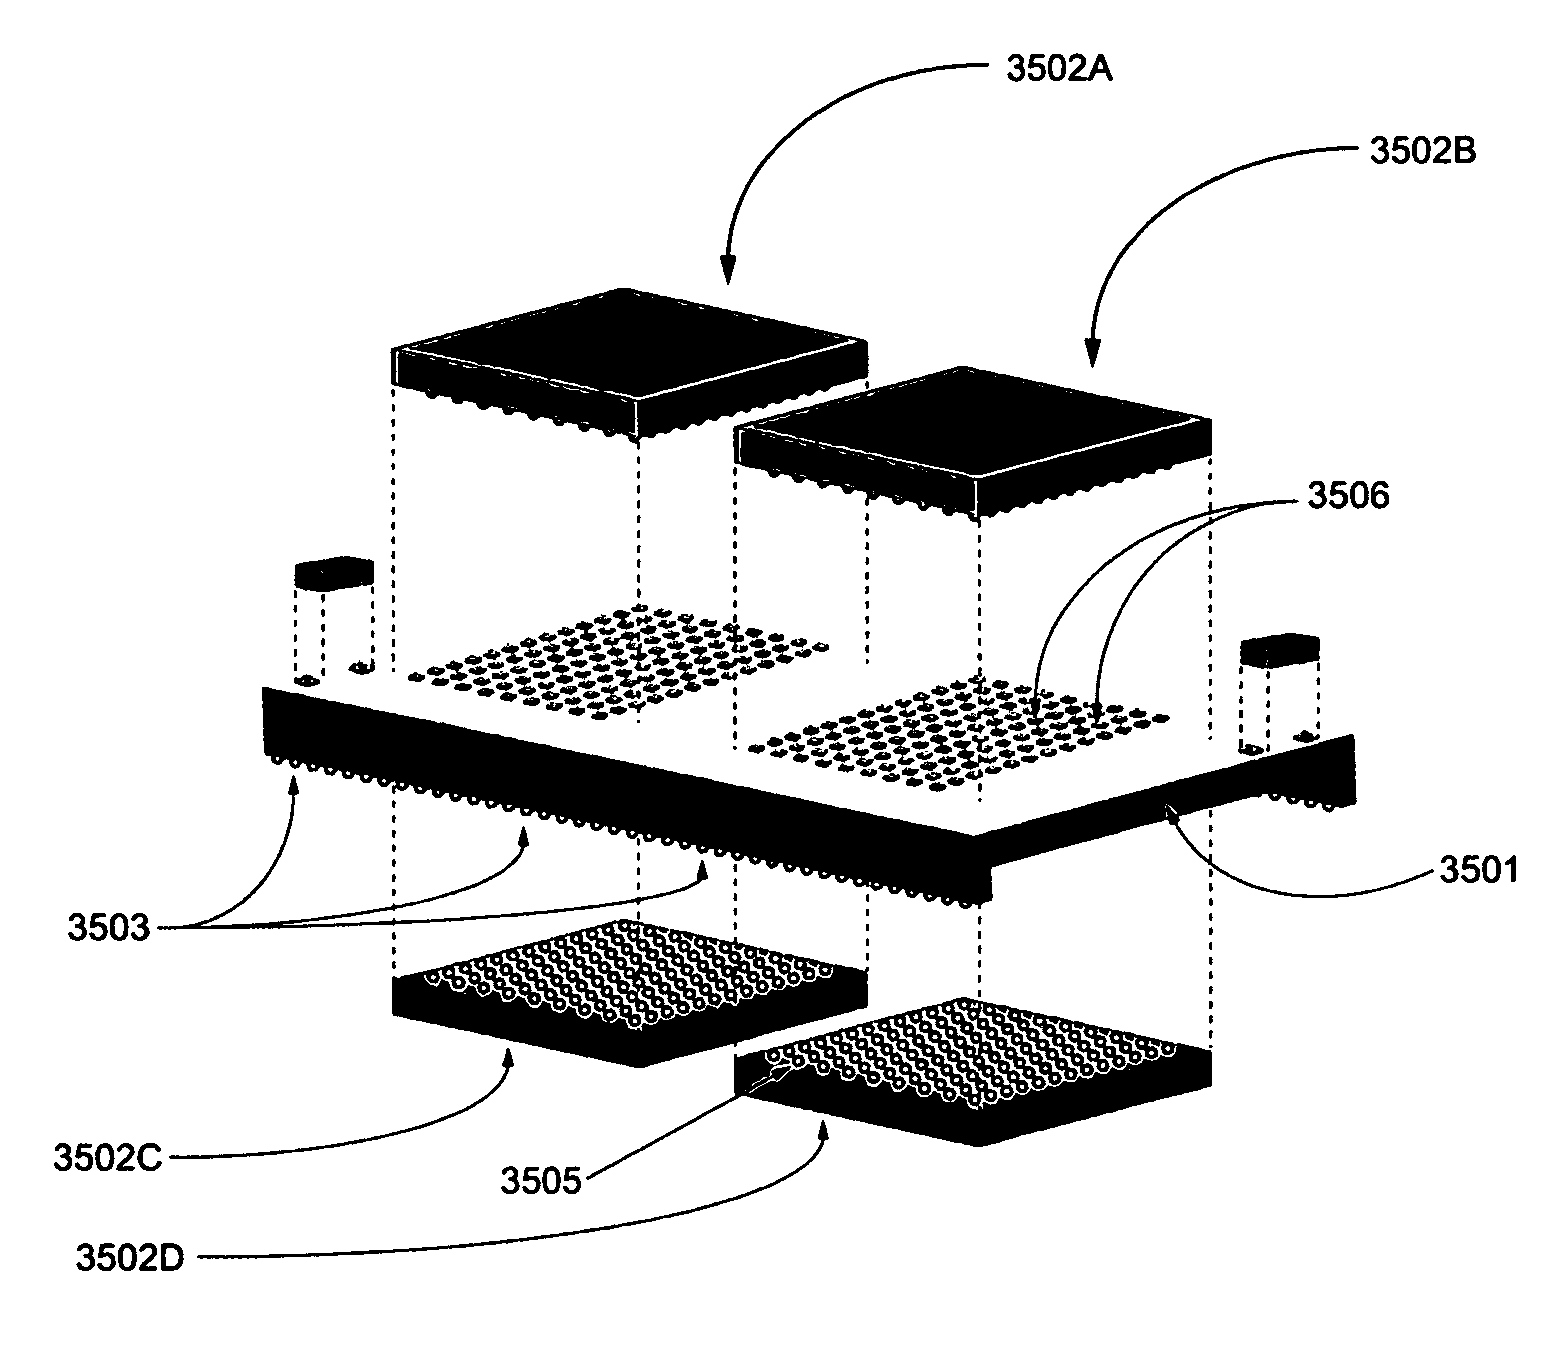 Carrier-based electronic module